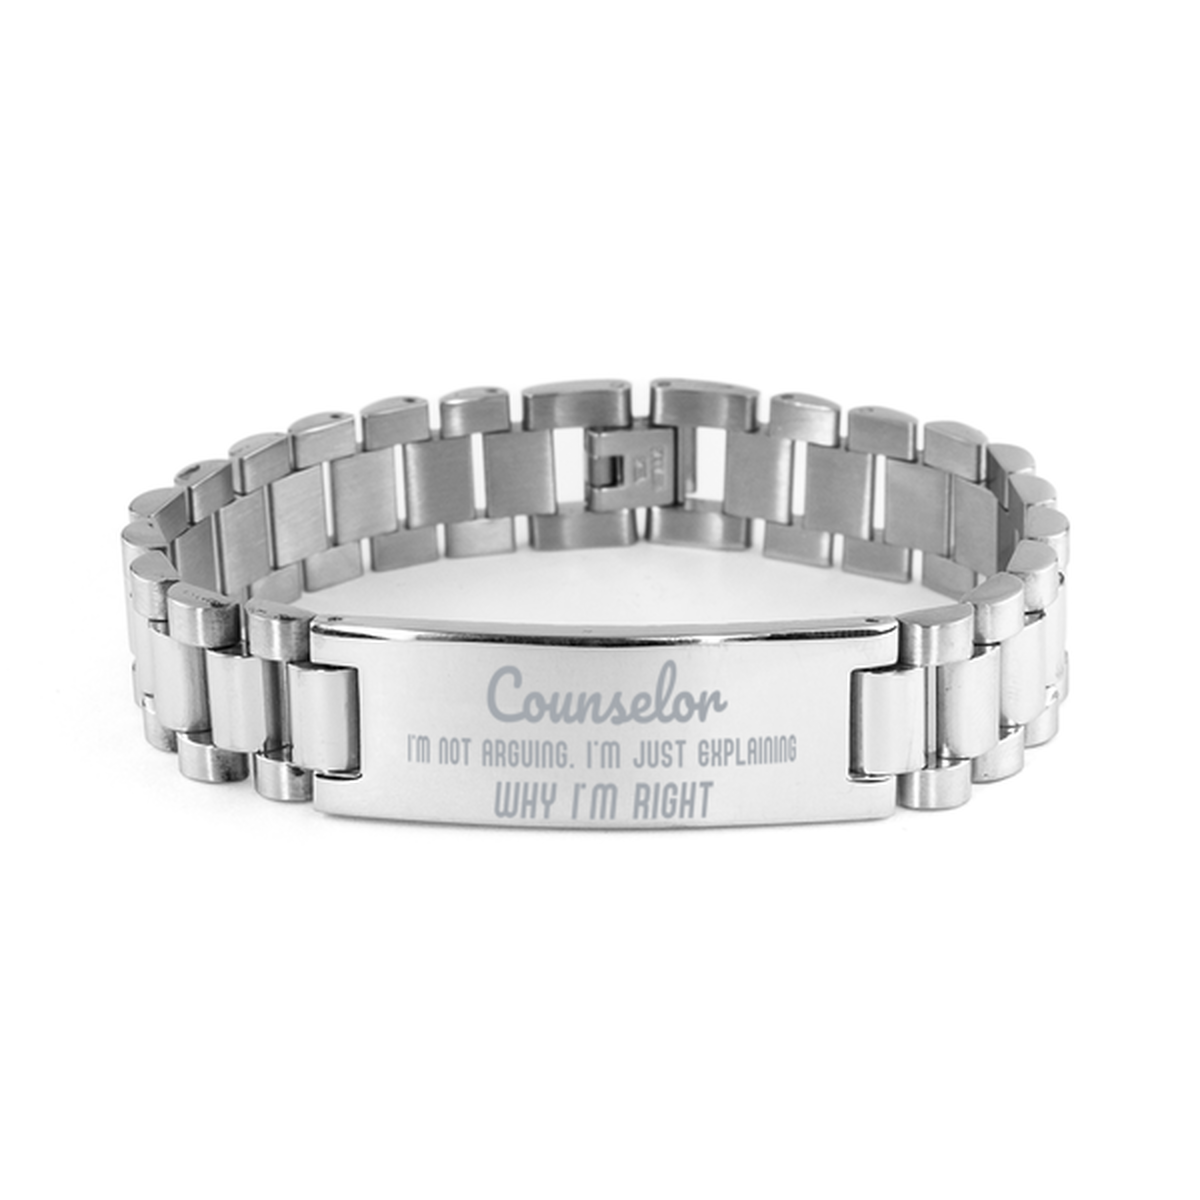 Counselor I'm not Arguing. I'm Just Explaining Why I'm RIGHT Ladder Stainless Steel Bracelet, Graduation Birthday Christmas Counselor Gifts For Counselor Funny Saying Quote Present for Men Women Coworker